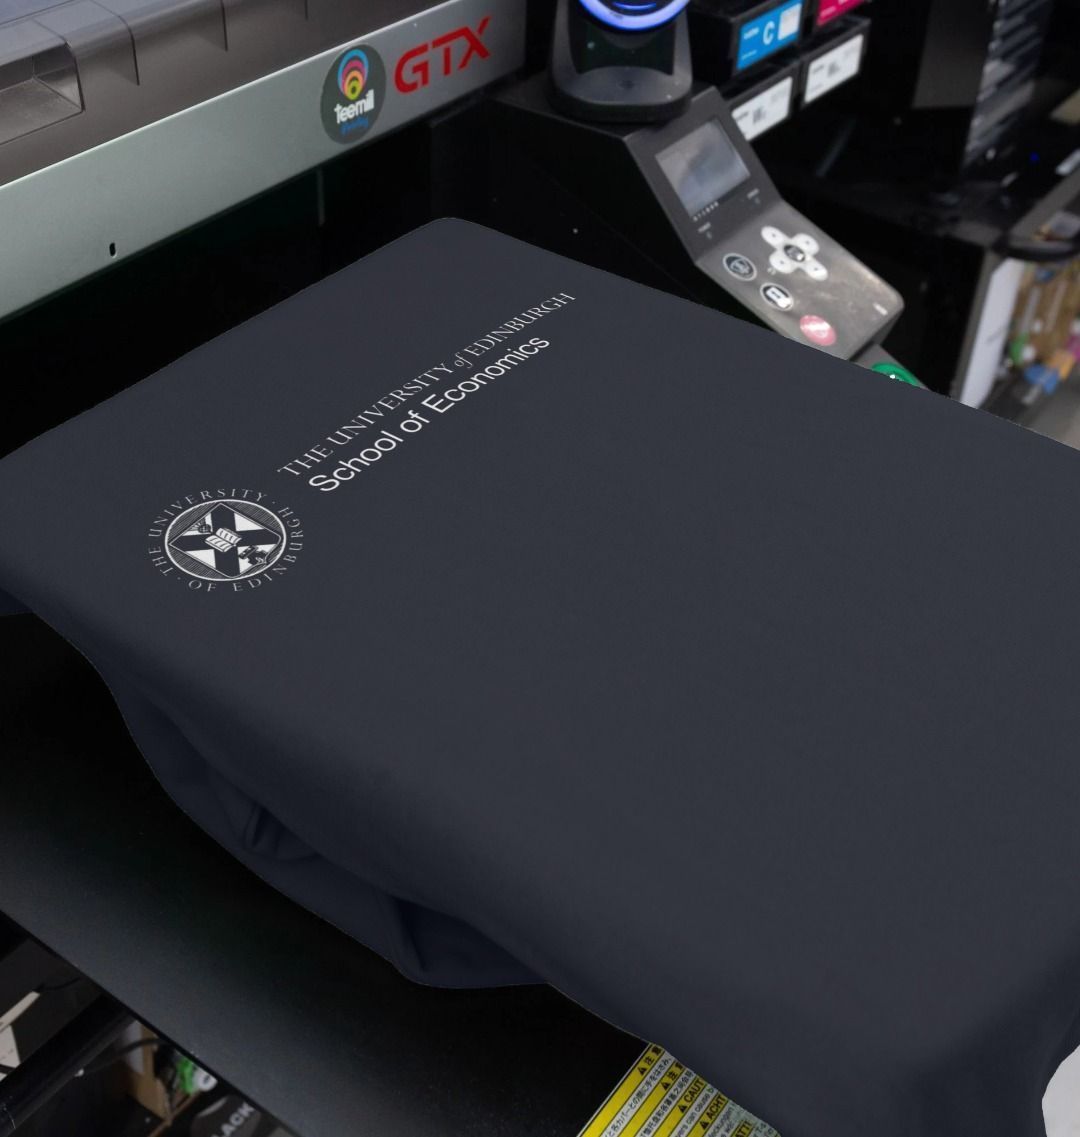 Our School of Economics Sweatshirt being printed by our print on demand partner, teemill.